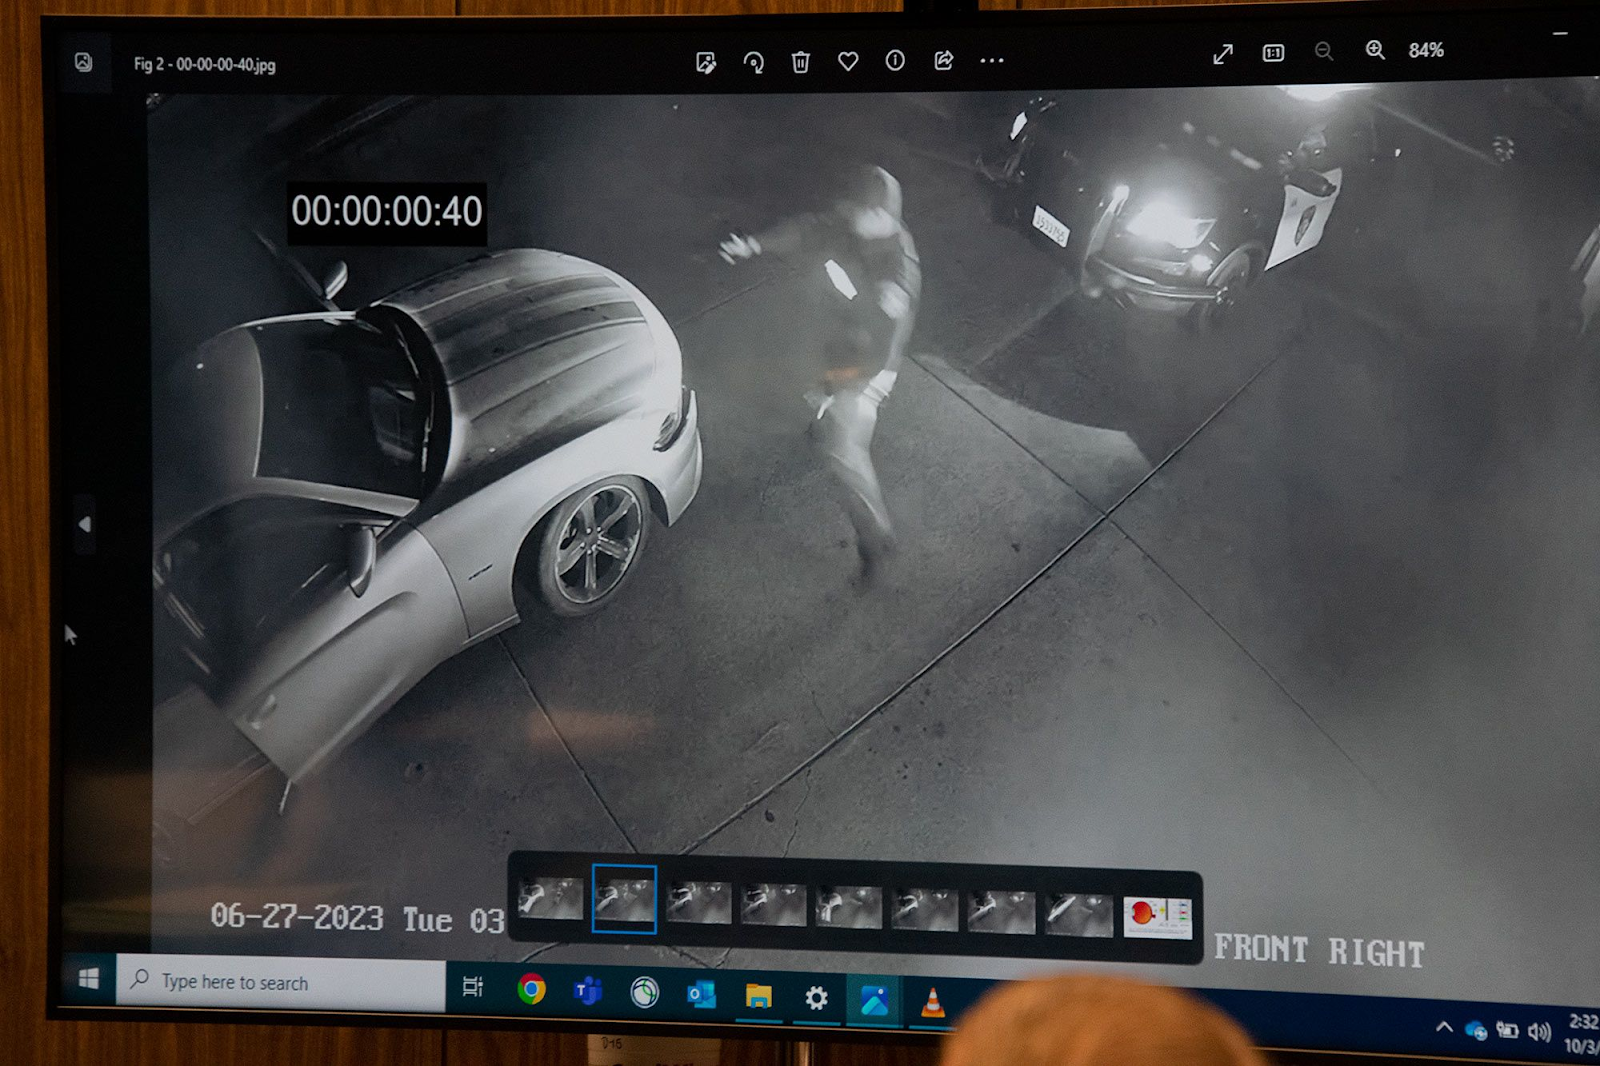 A still from surveillance video shown in court shows that Jamazea Kittell had already started moving away from Officer Brad Kim before Kim crossed in front of his vehicle. 